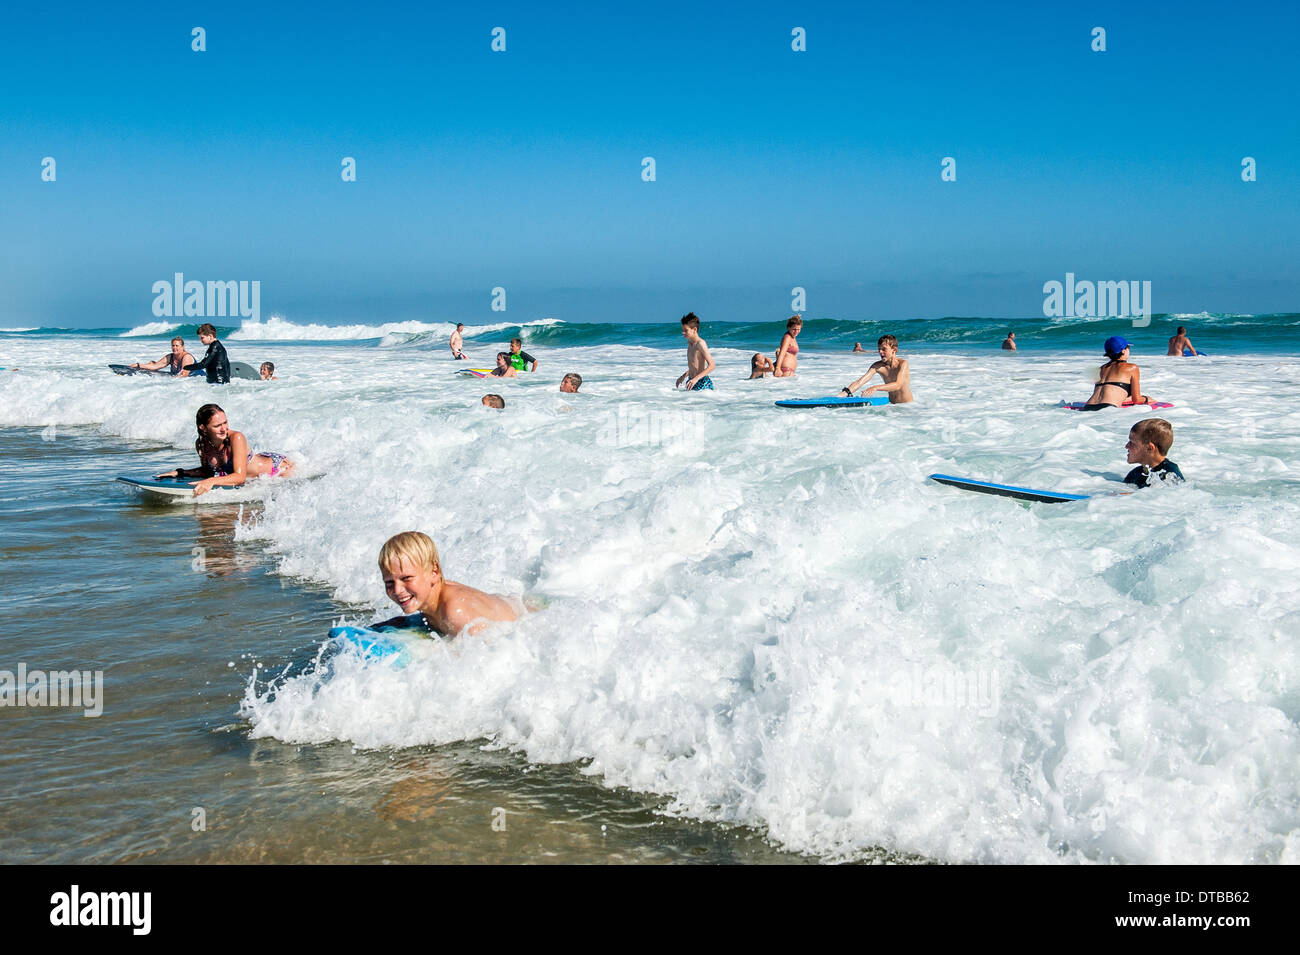 Children enjoy body boarding the waves at Sedgefield, Eastern Cape, South Africa Stock Photo